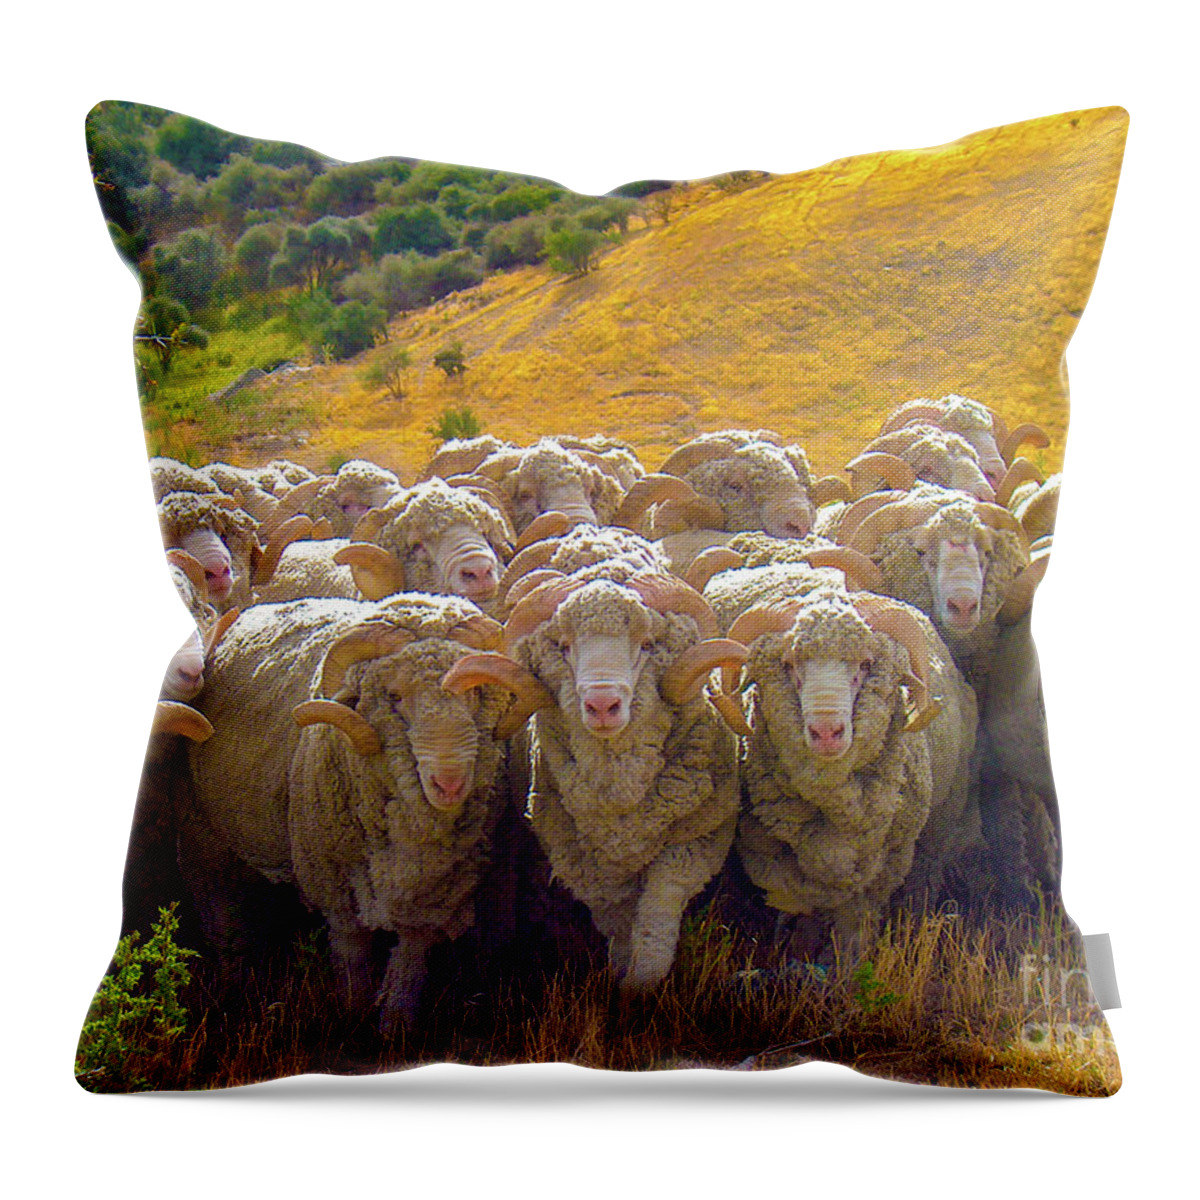 Sheep Throw Pillow featuring the photograph Herding Merino Sheep by Leslie Struxness